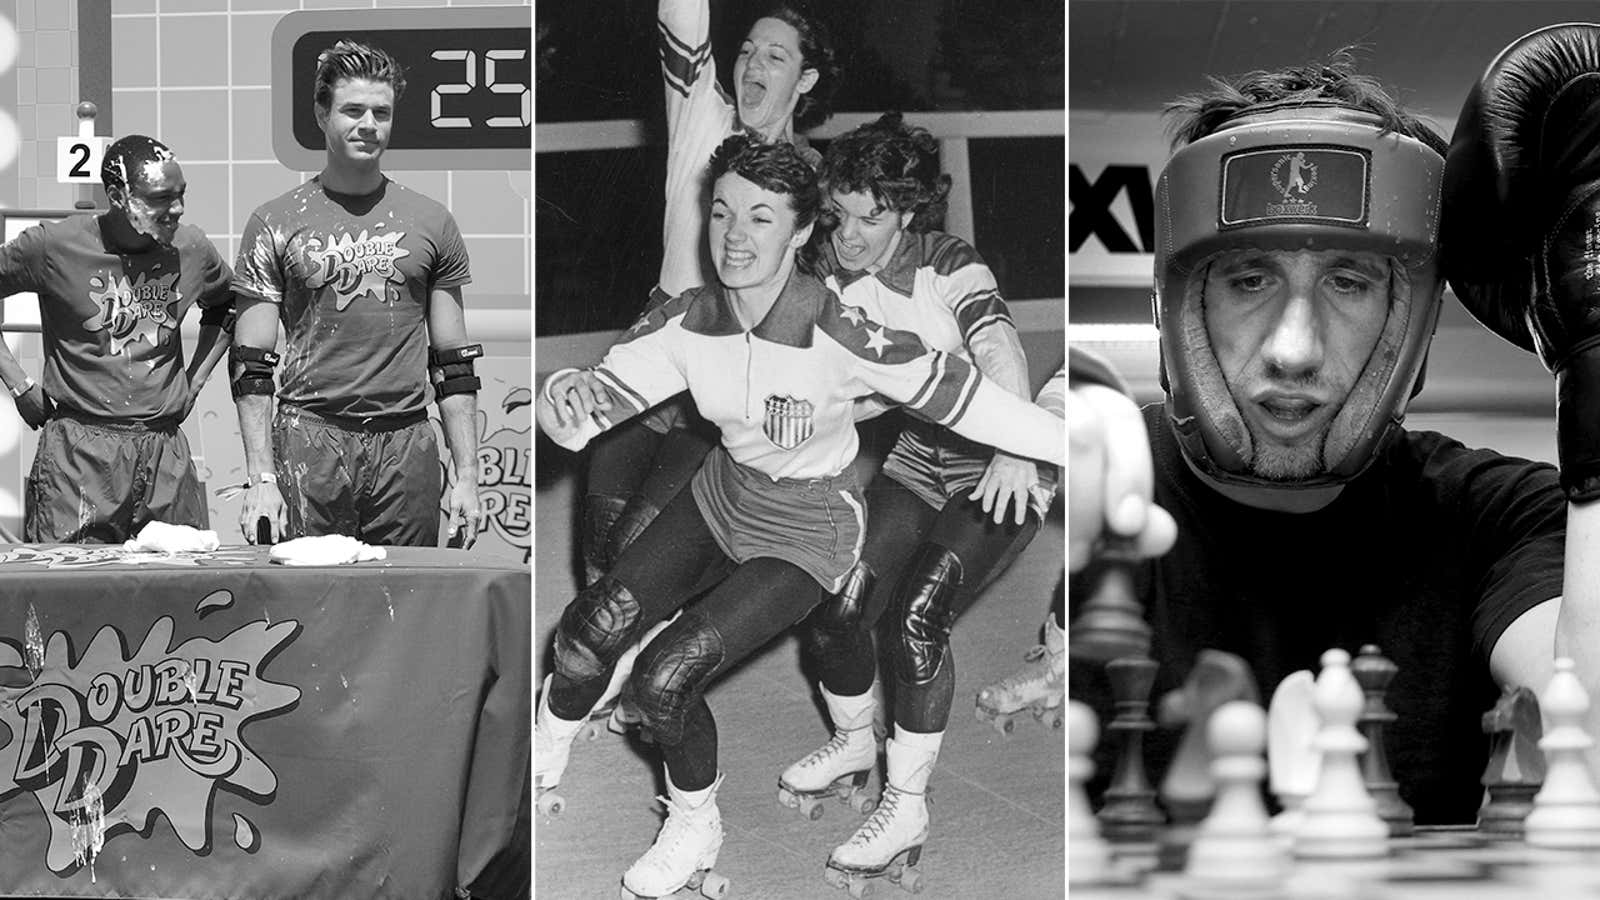 <i>GLOW</i> is just the start: 16 unusual athletic events deserving TV dramatization